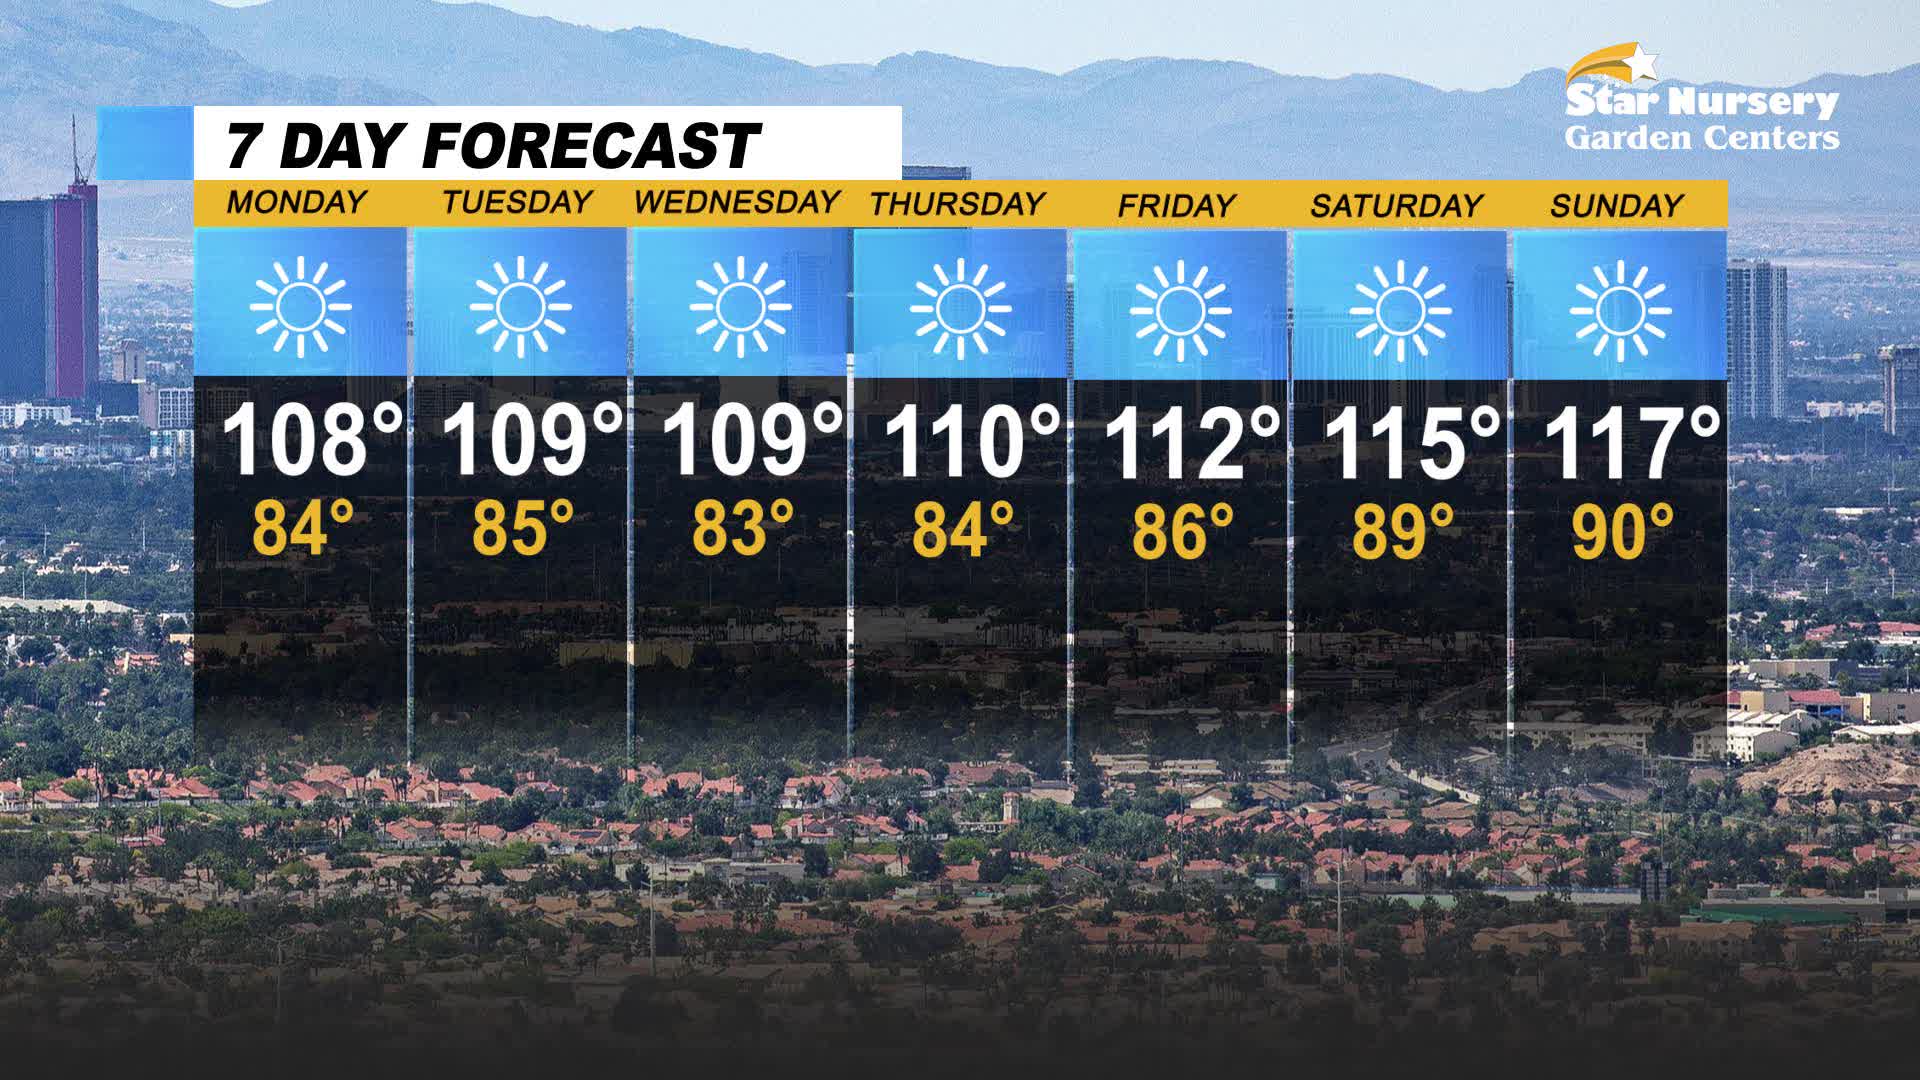 Temperatures reach above 110 at end of week